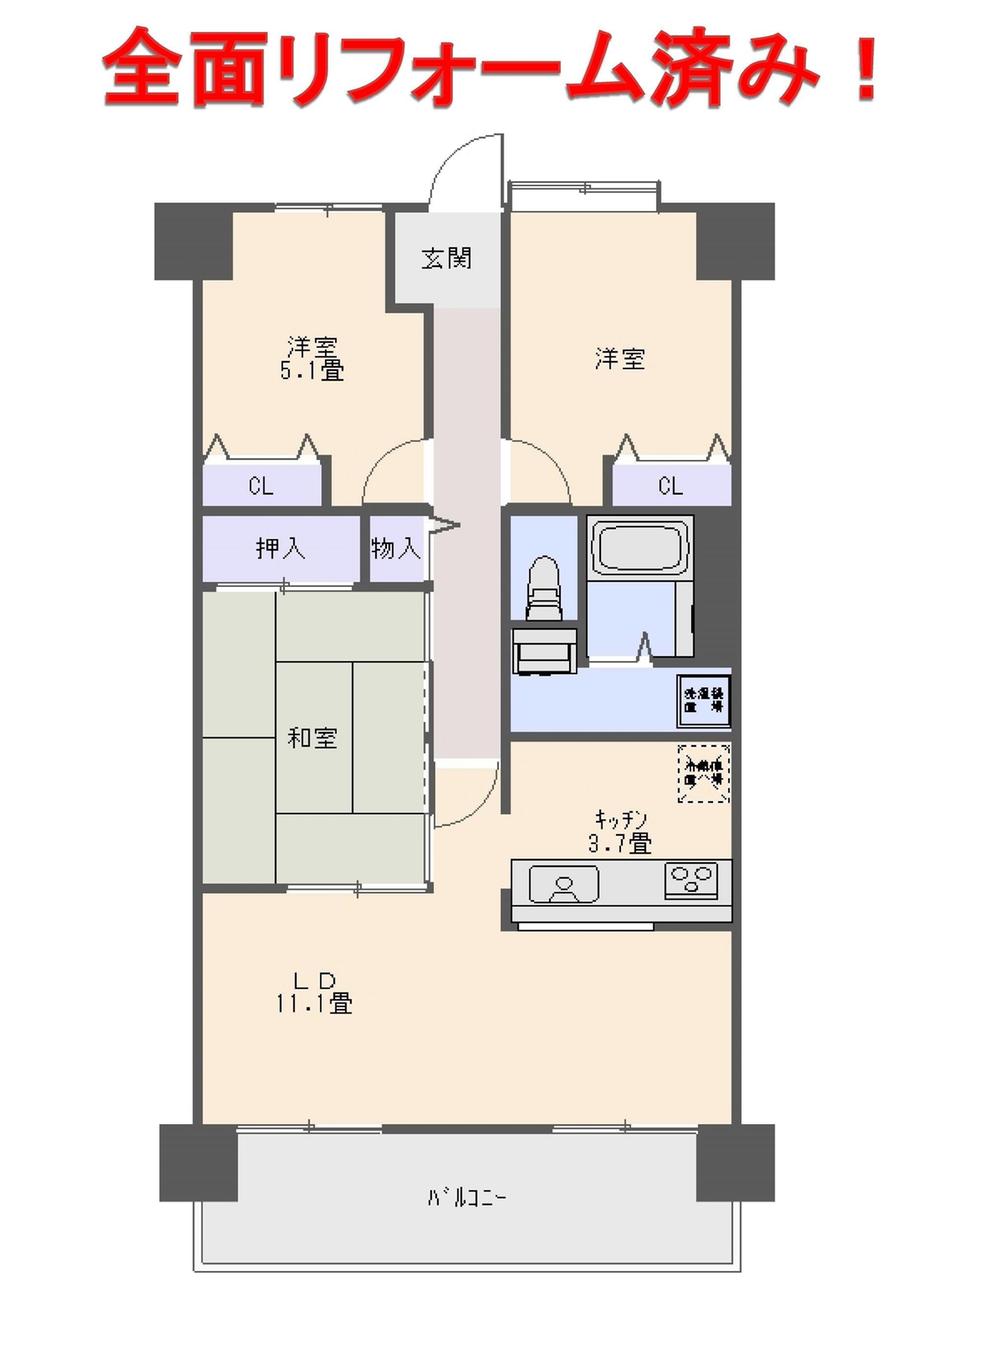 Floor plan. 3LDK, Price 16.8 million yen, Footprint 70.1 sq m , Balcony area 11.97 sq m the entire renovation completed If different from the current state will honor the current state